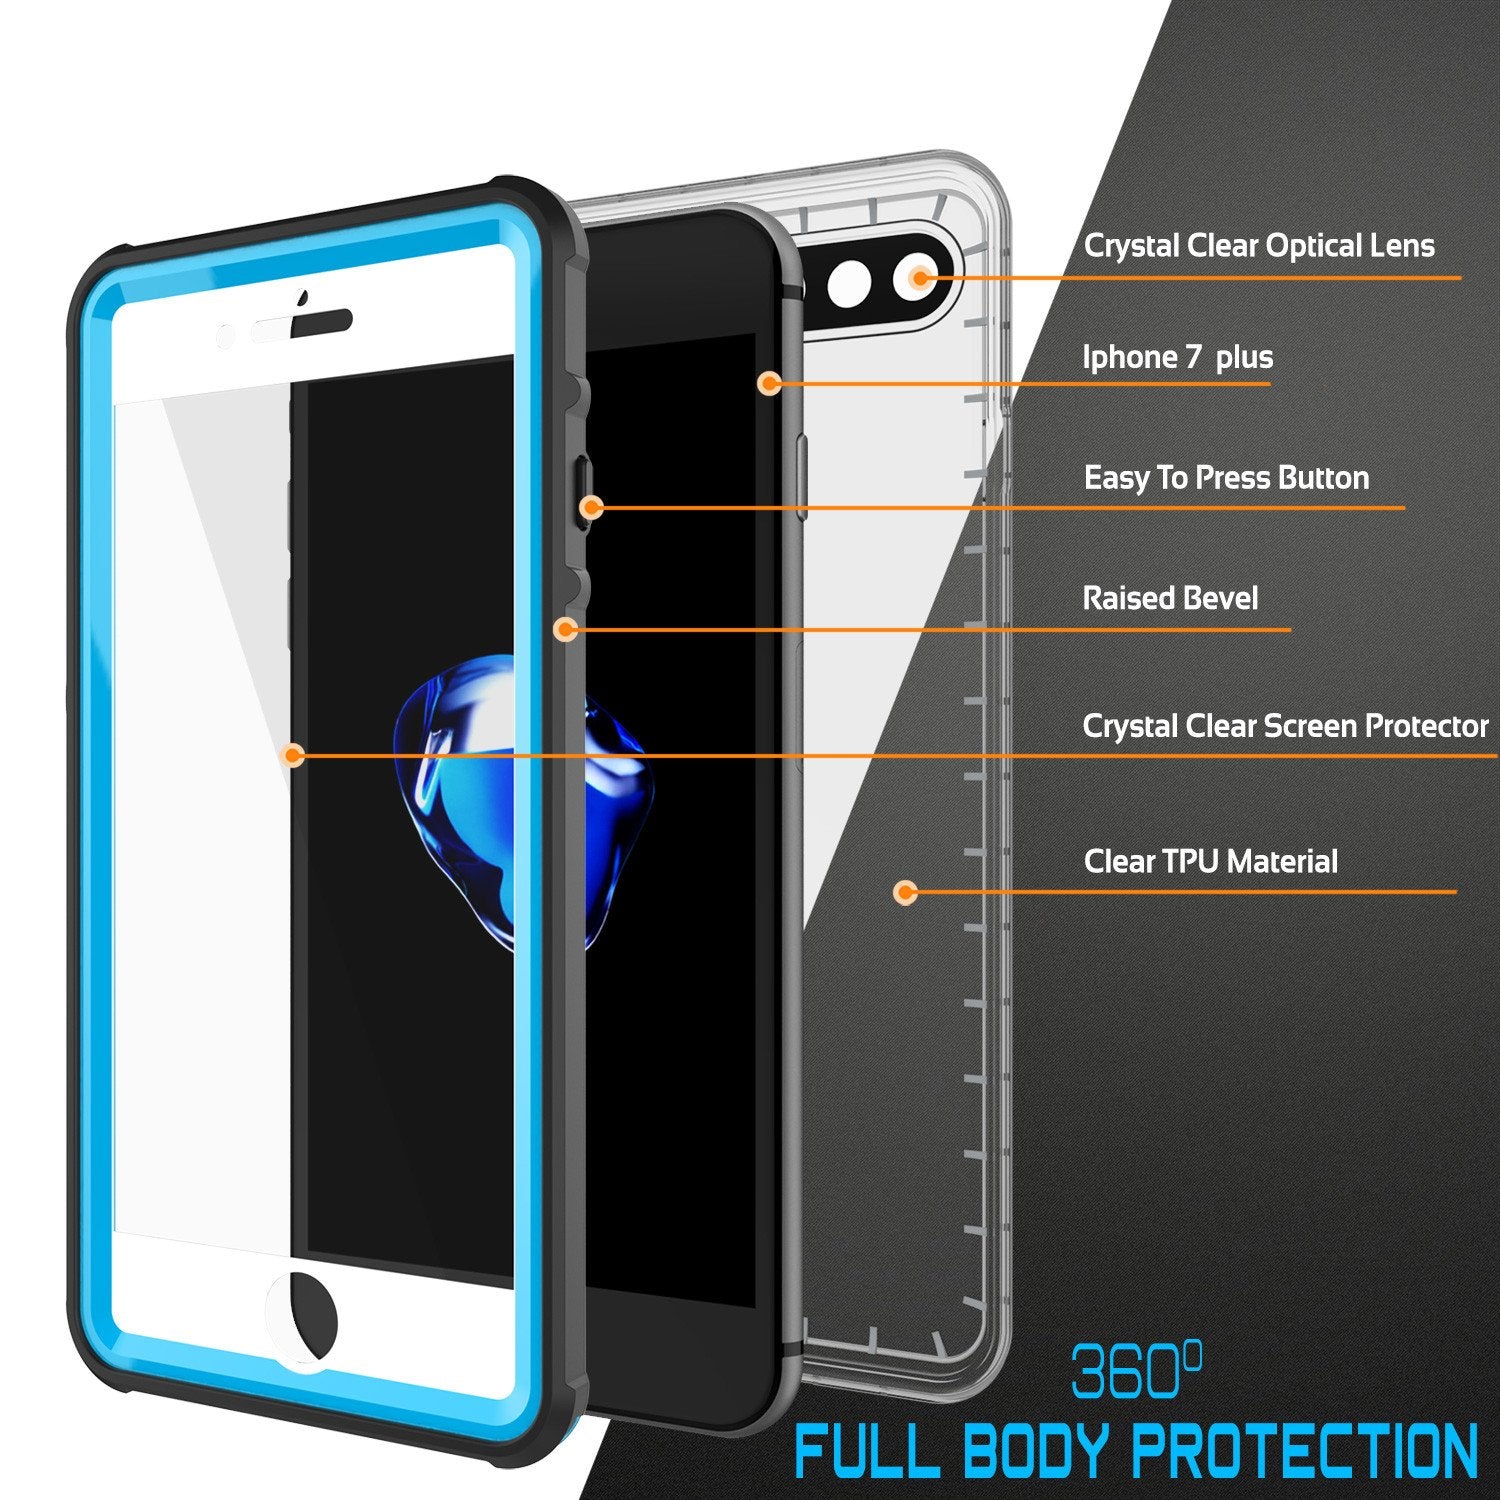 iPhone 7+ Plus Waterproof Case, PUNKcase CRYSTAL Light Blue  W/ Attached Screen Protector  | Warranty